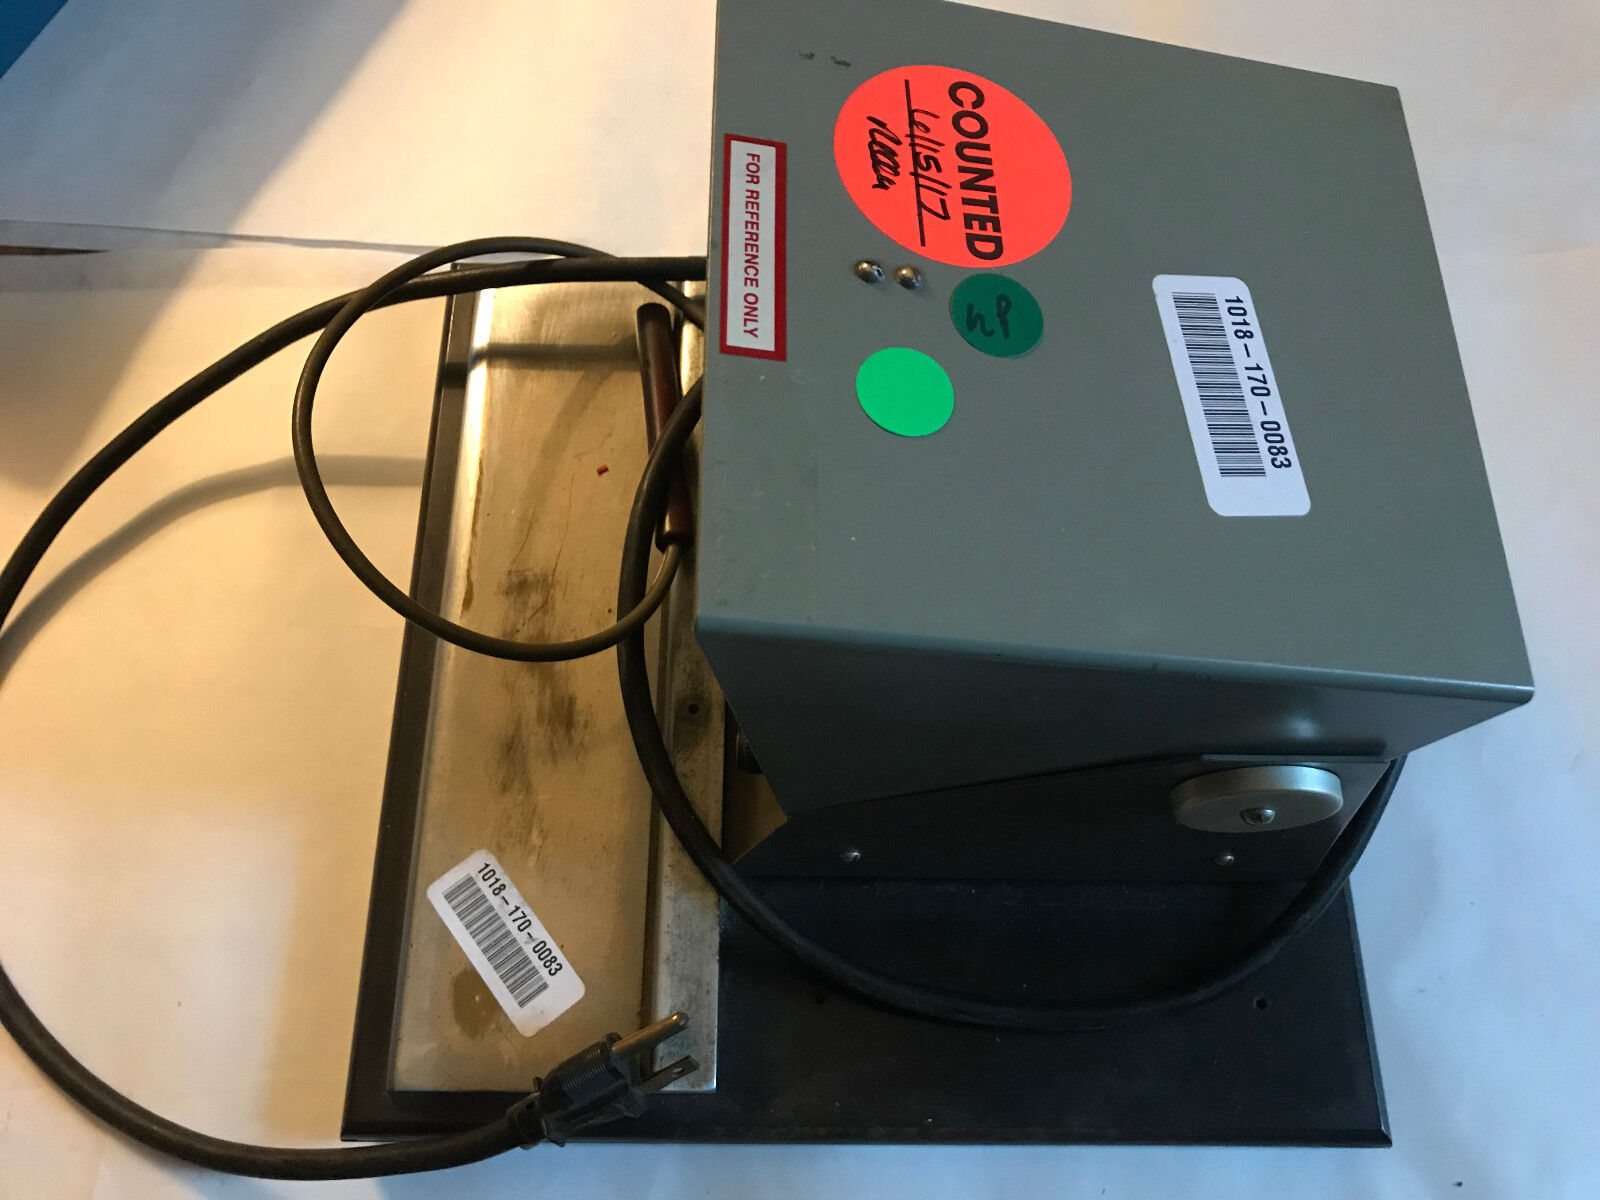 RADIO FREQUENCY LABS 485,MODEL 485 RADIO FREQUENCY ELECTRONIC NULL DETECTOR,ET